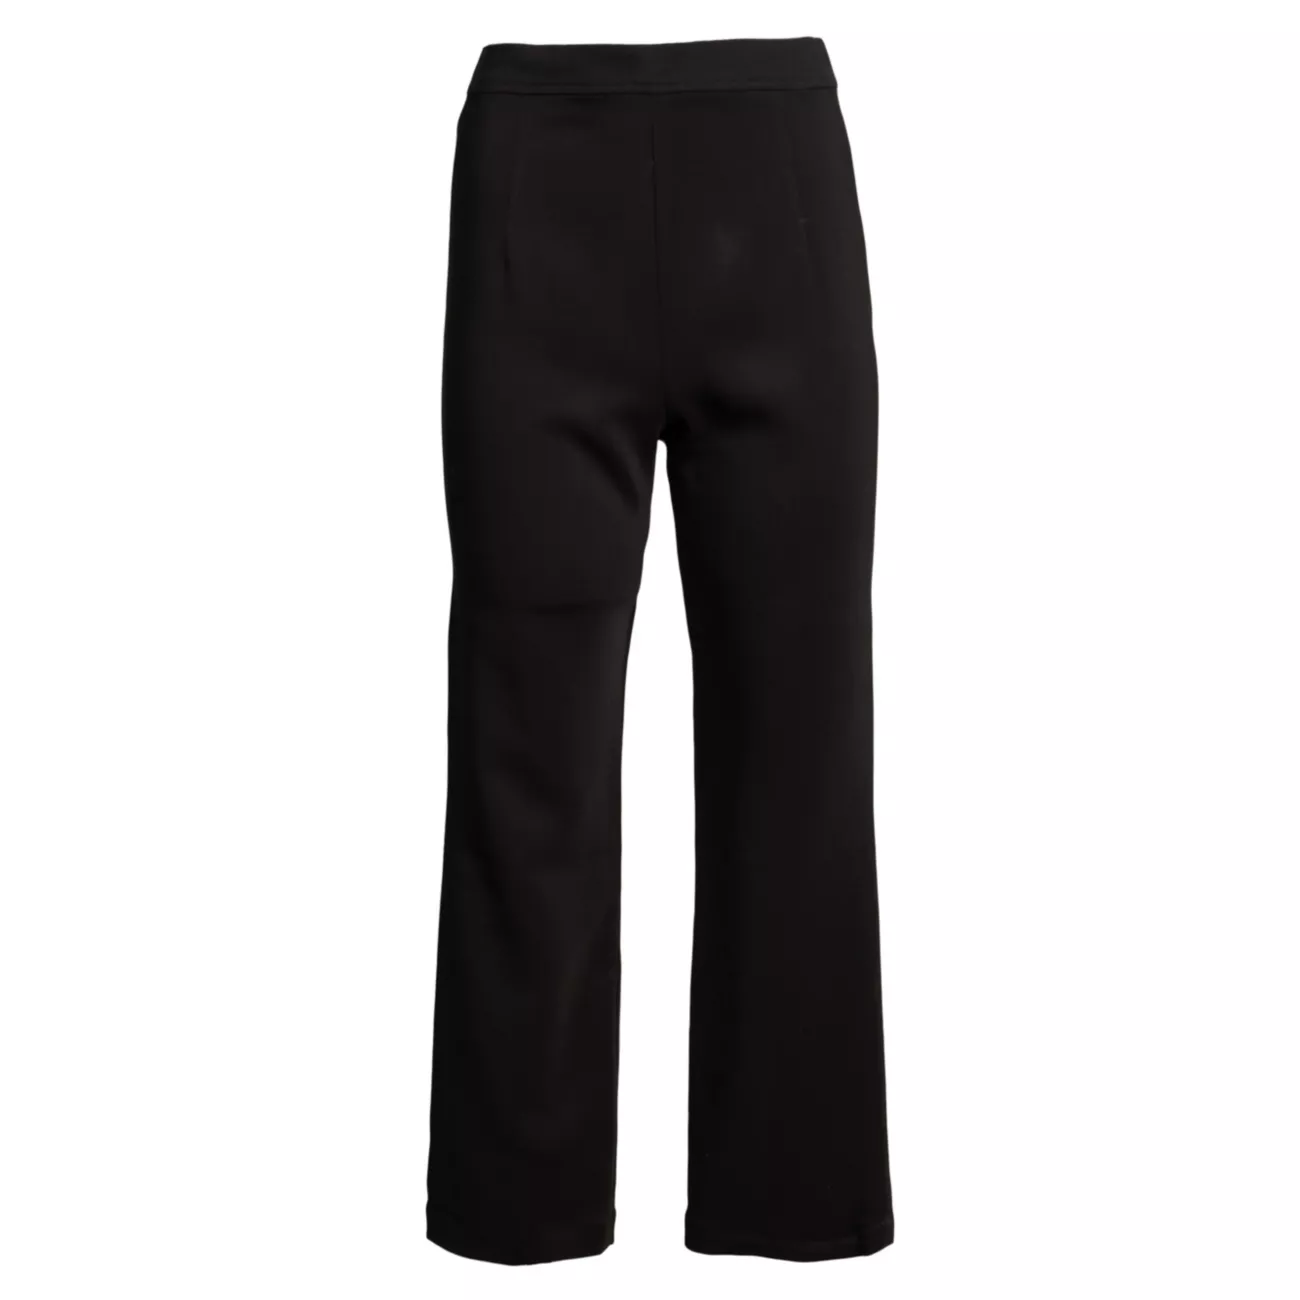 Quincy High-Waisted Stretch Pants Frances Valentine